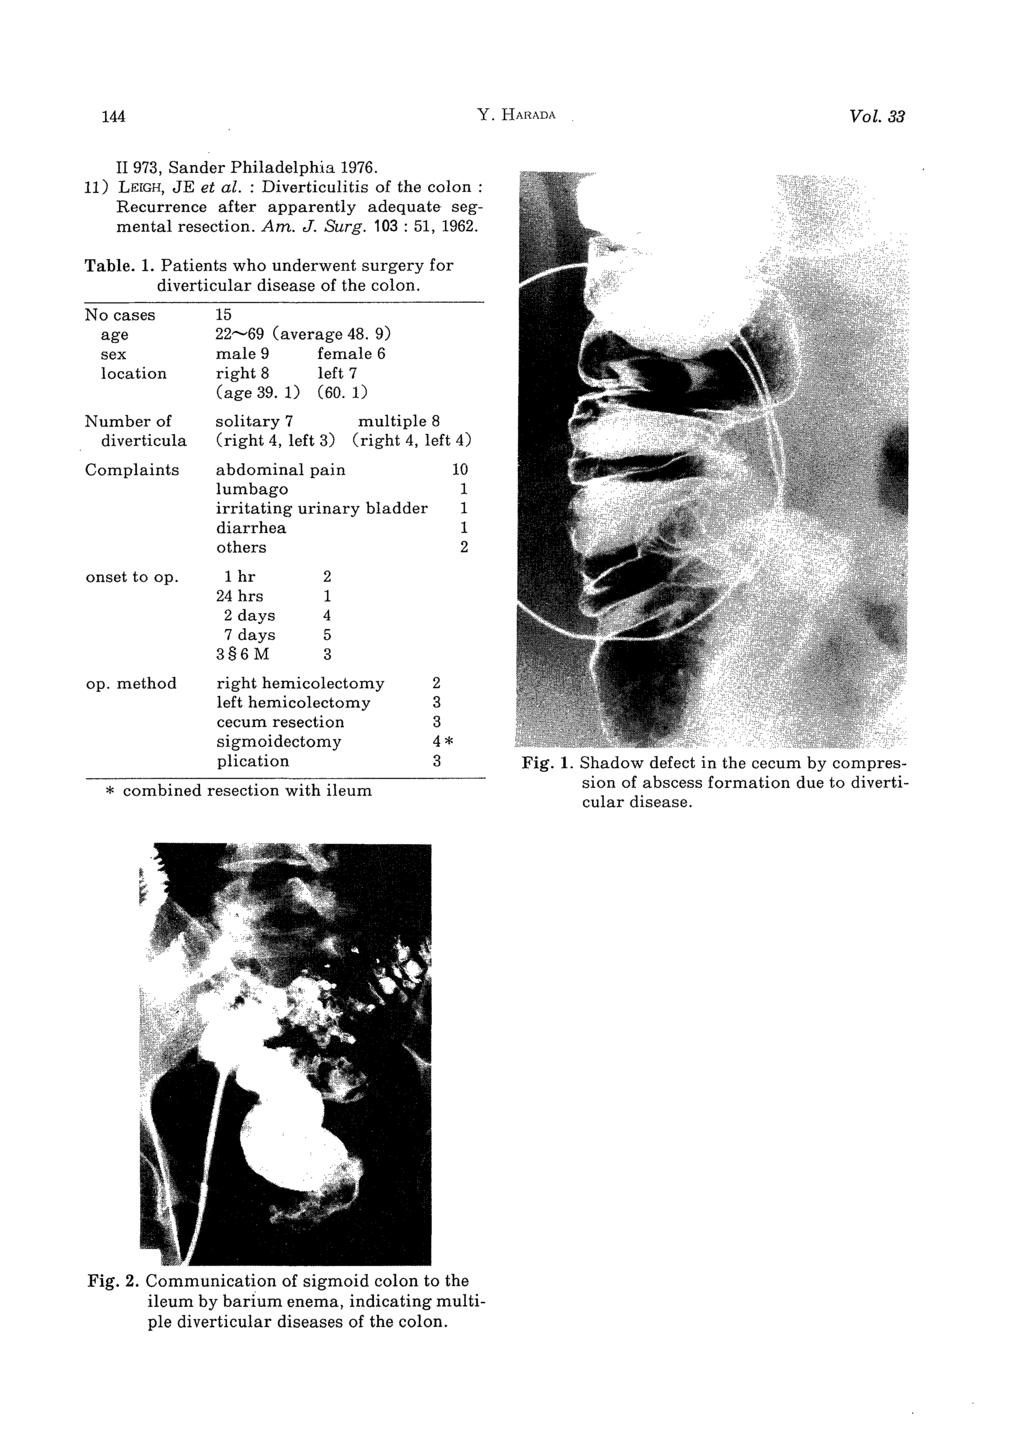 11973, Sander Philadelphia 1976. 11) LEIGH, JE et al.: Diverticulitis of the colon Recurrence after apparently adequate segmental resection. Am. J. Surg. 103 : 51, 1962. Table. 1. Patients who underwent surgery for diverticular disease of the colon.